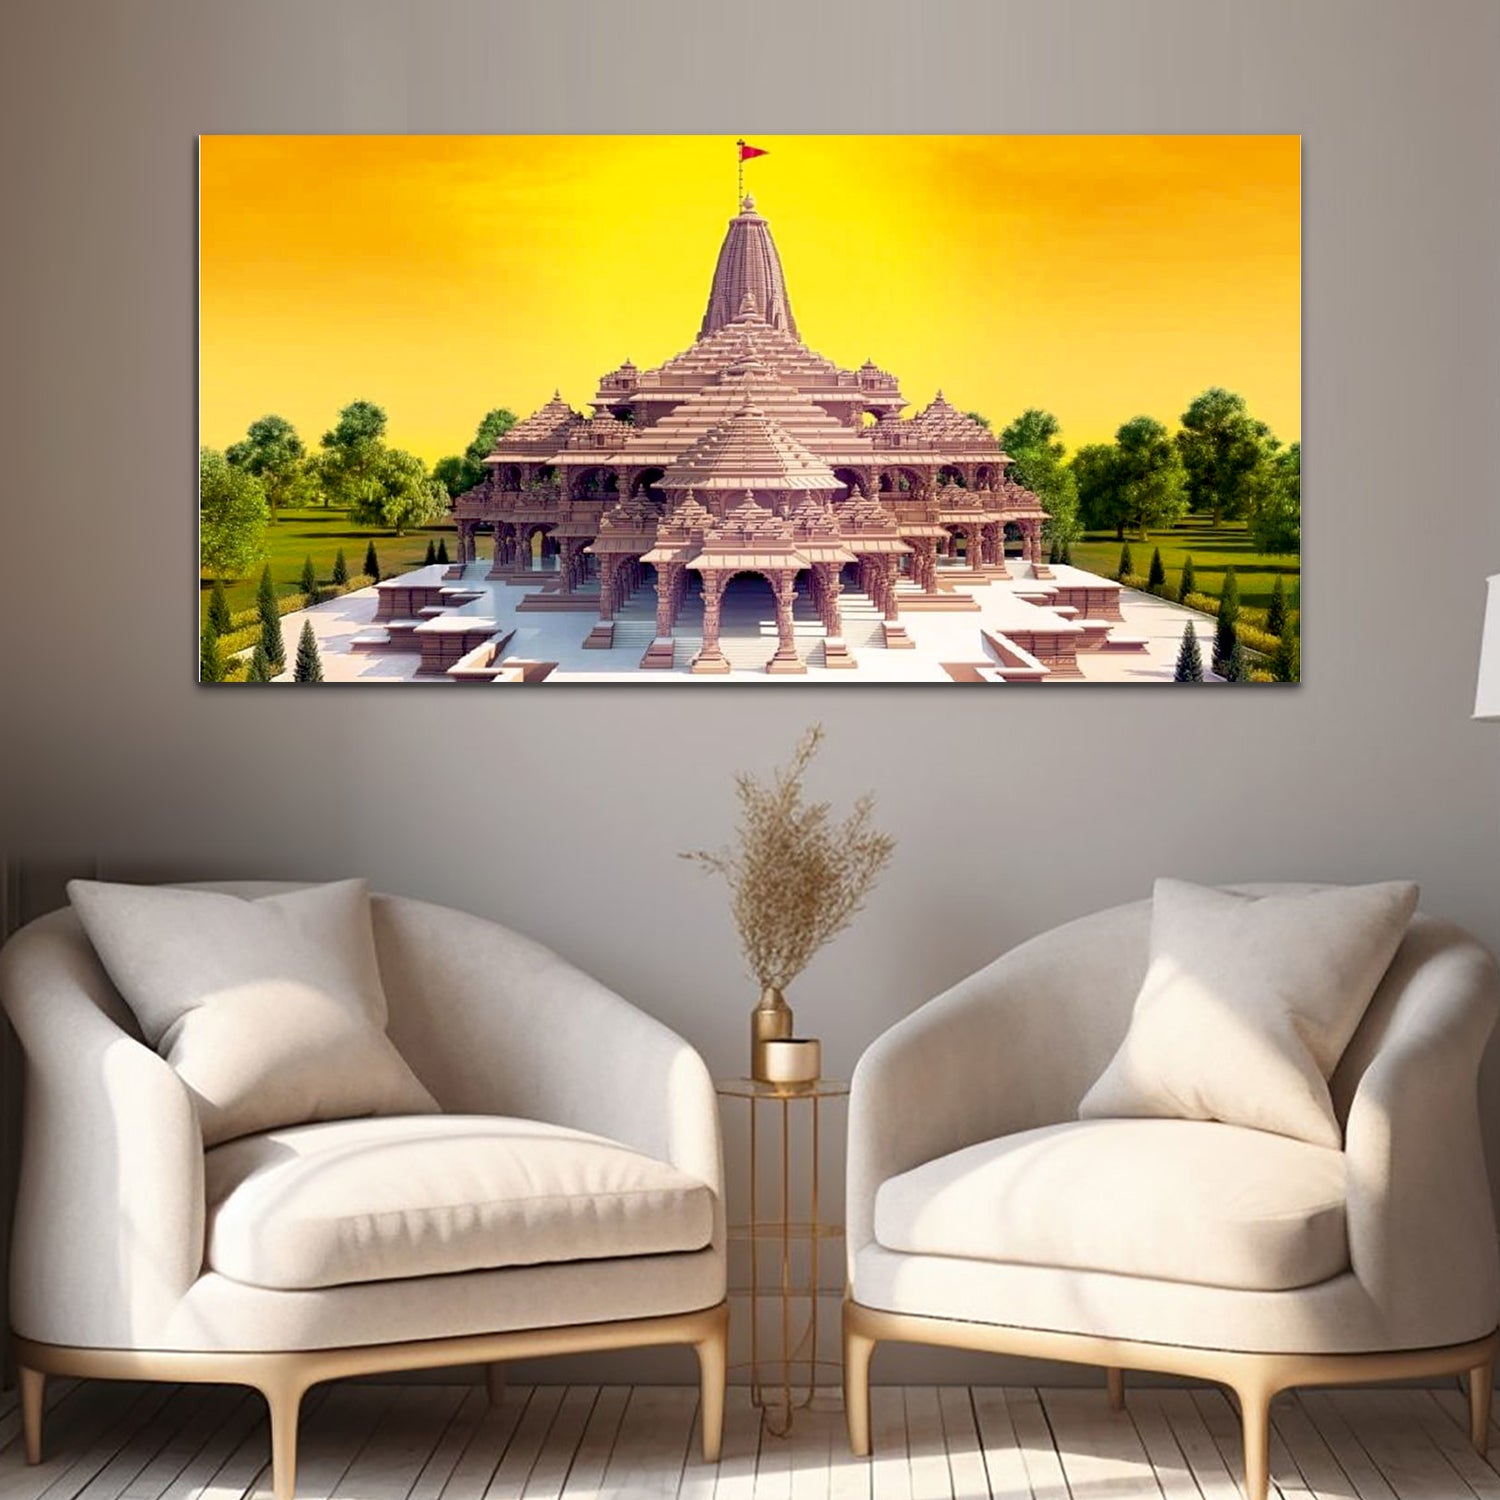 Shree Ram Gold & Voilet Canvas Wall Art Painting